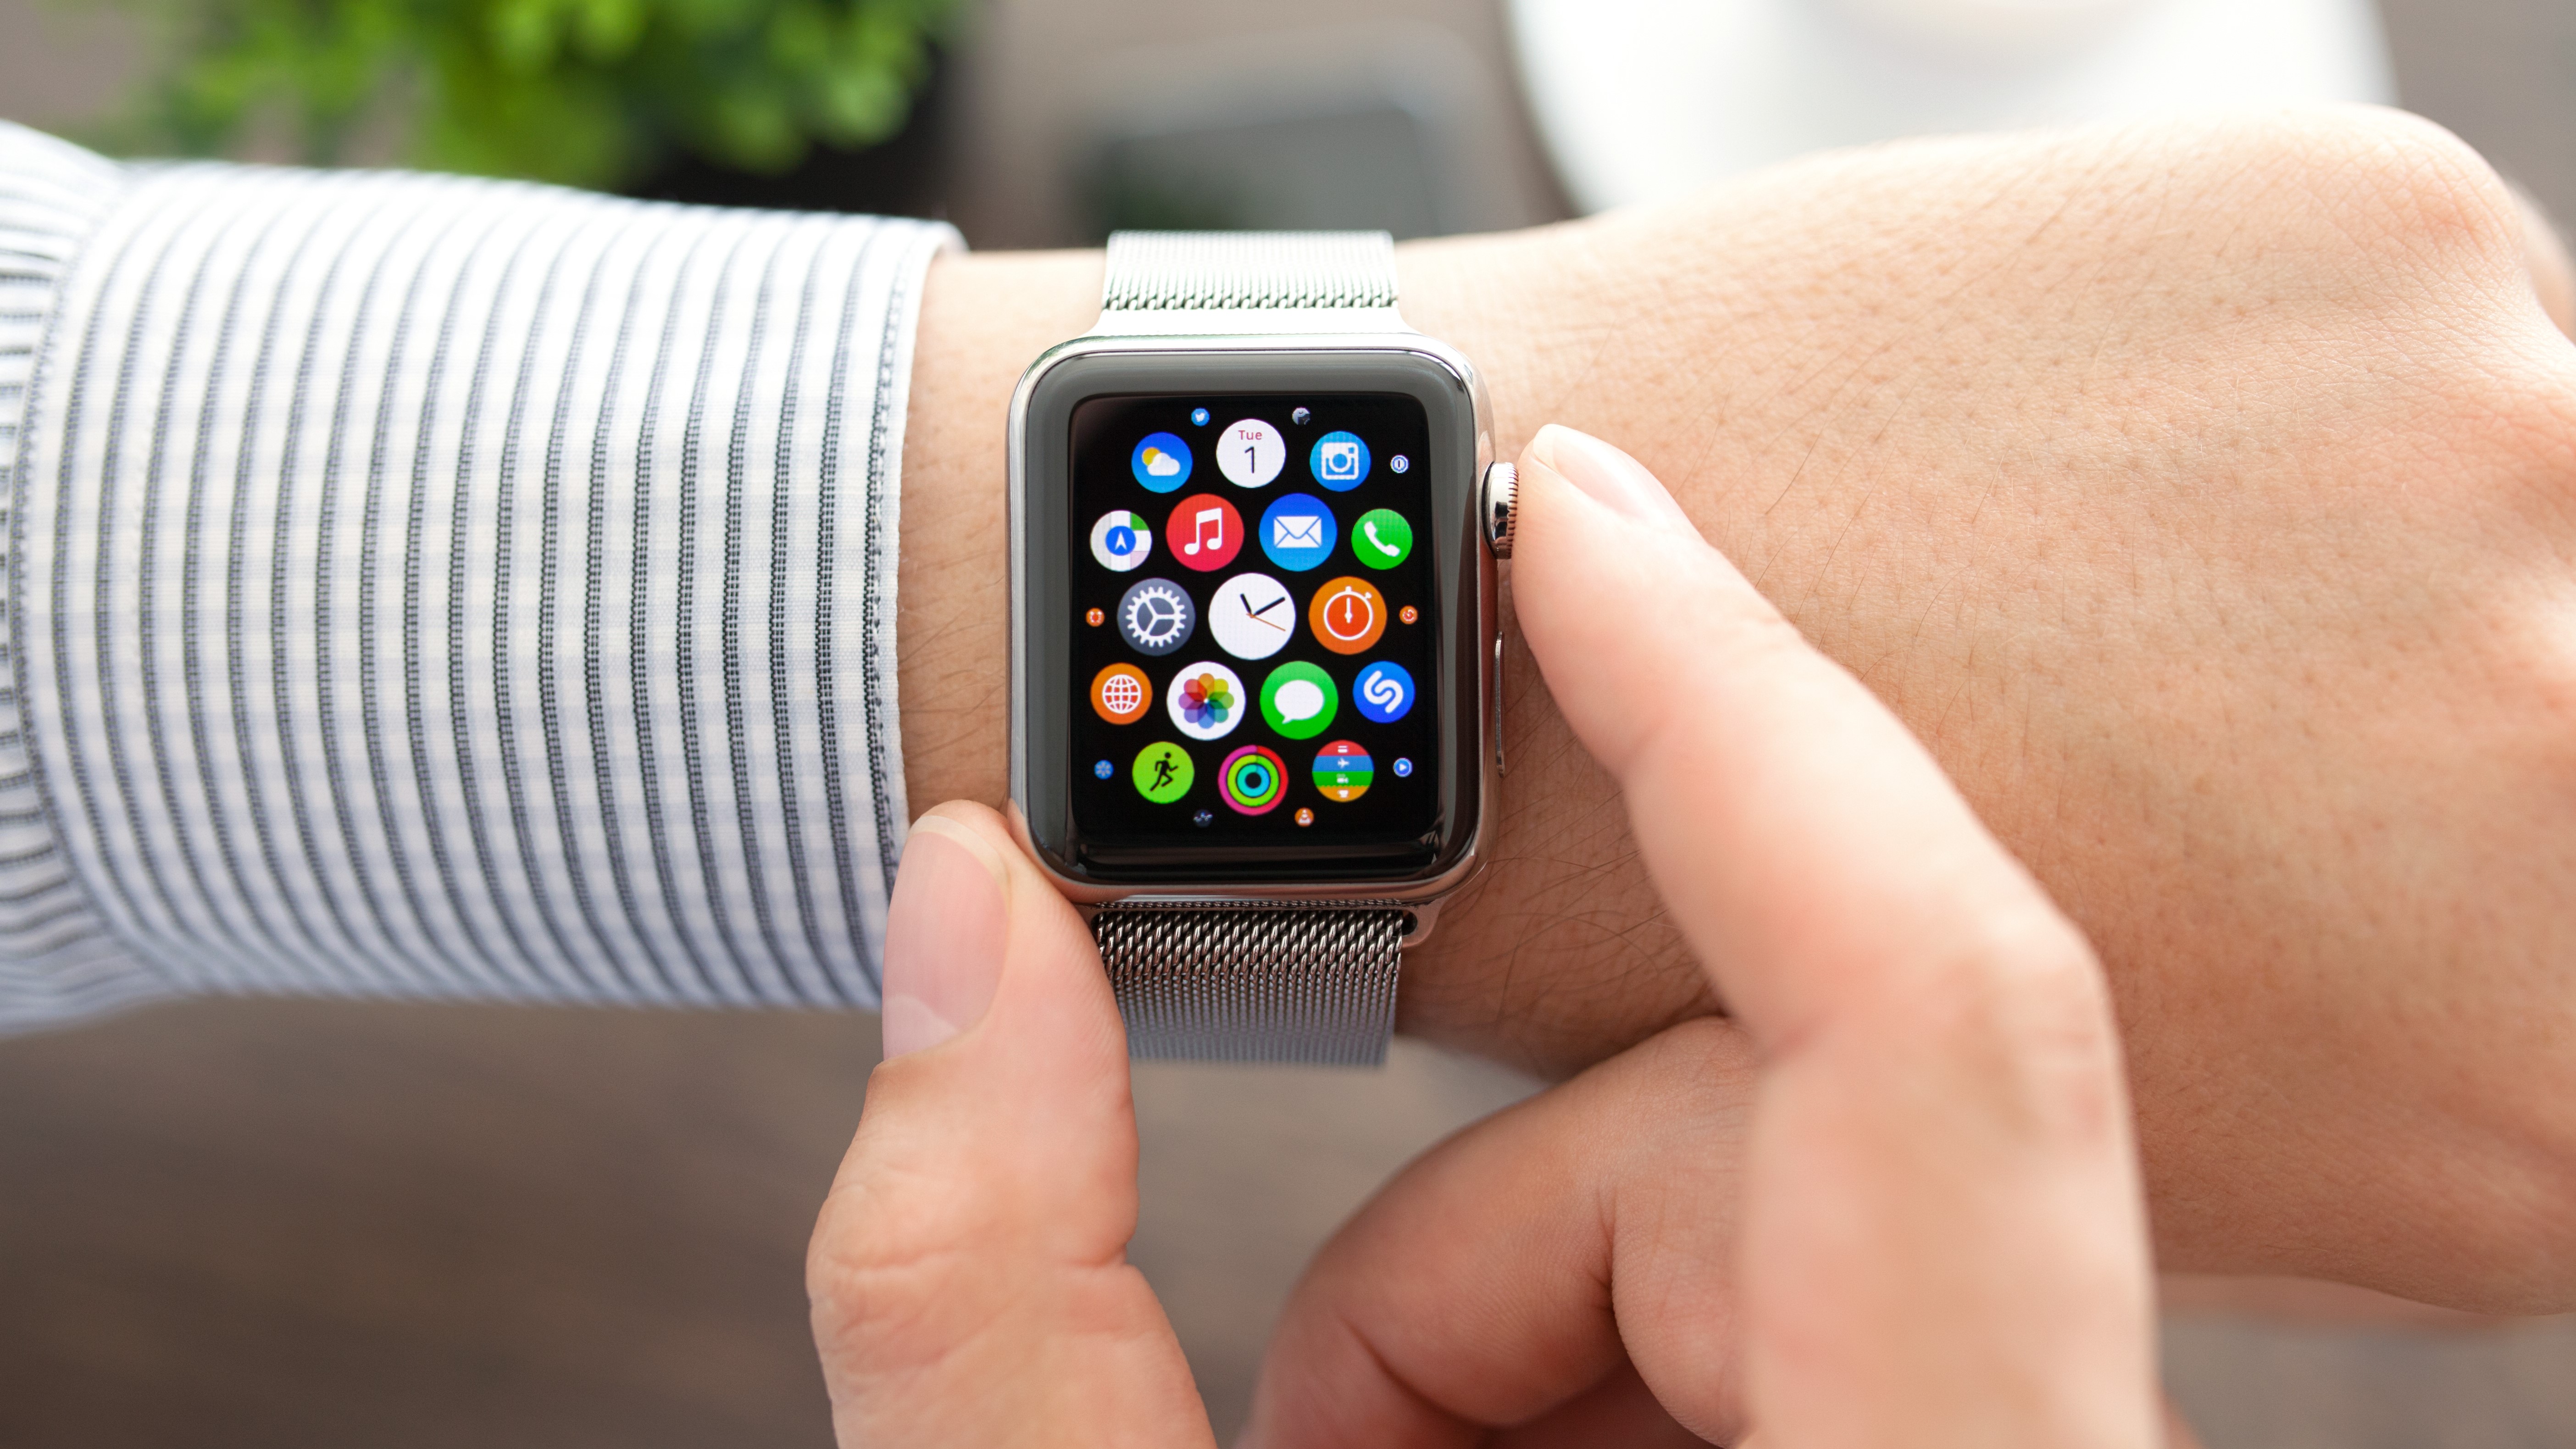 How To Measure Your Blood Pressure With An Apple Watch – Forbes Health